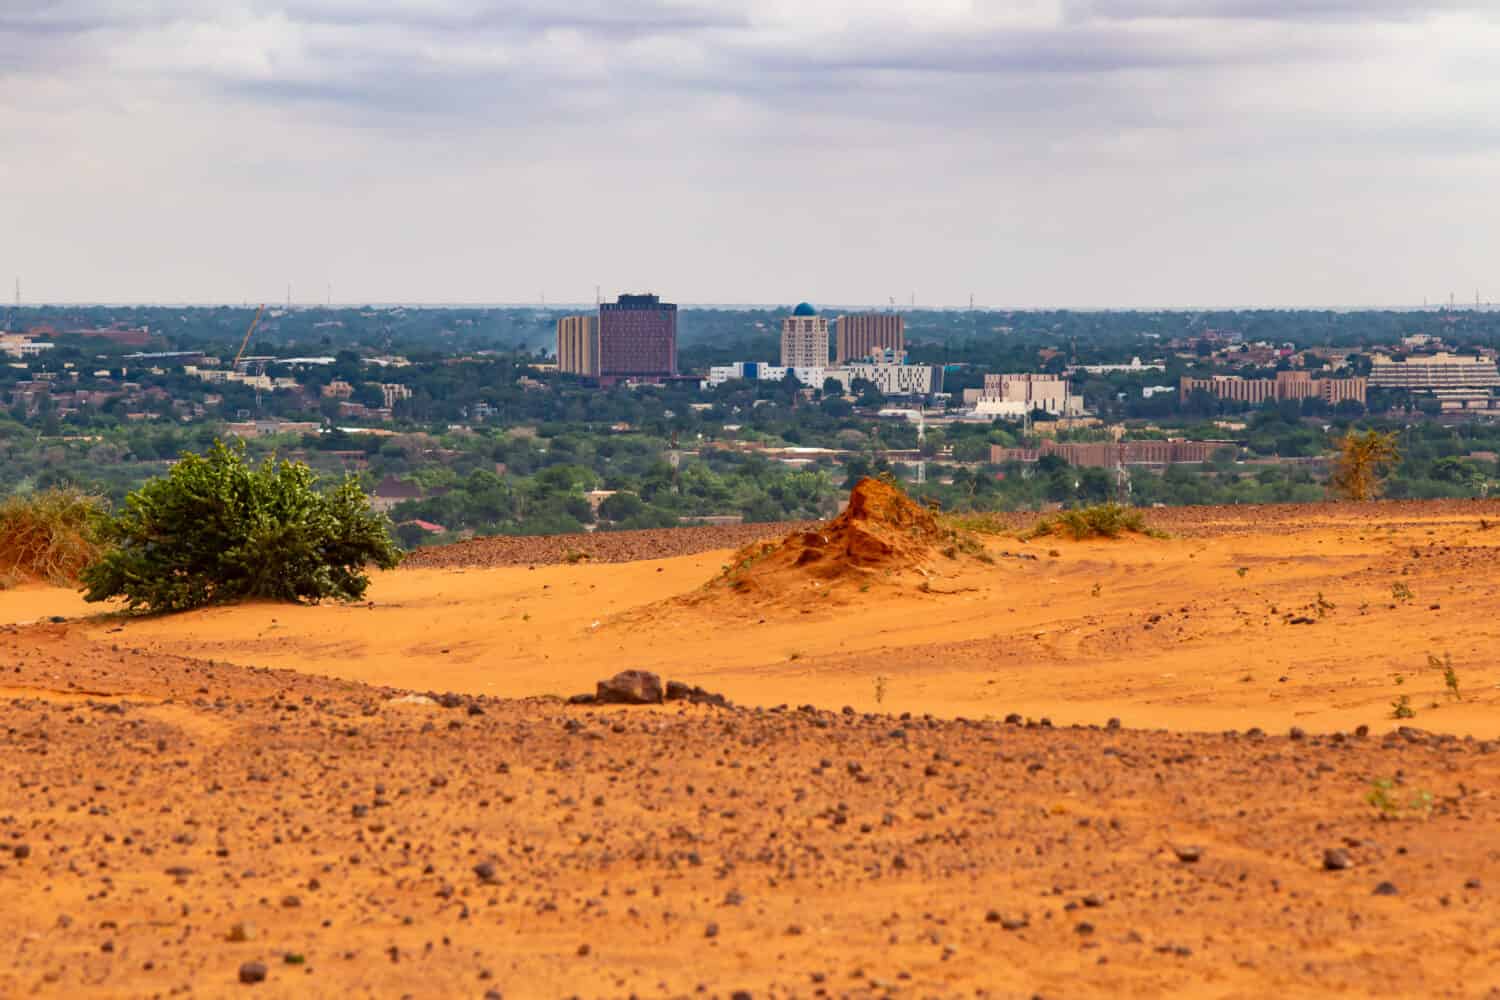 Skyline of Niamey capital of Niger seen from a higher sahelian dry plateau with a green bush and a termitary in foreground partially destroyed by the rains in the summer humid season